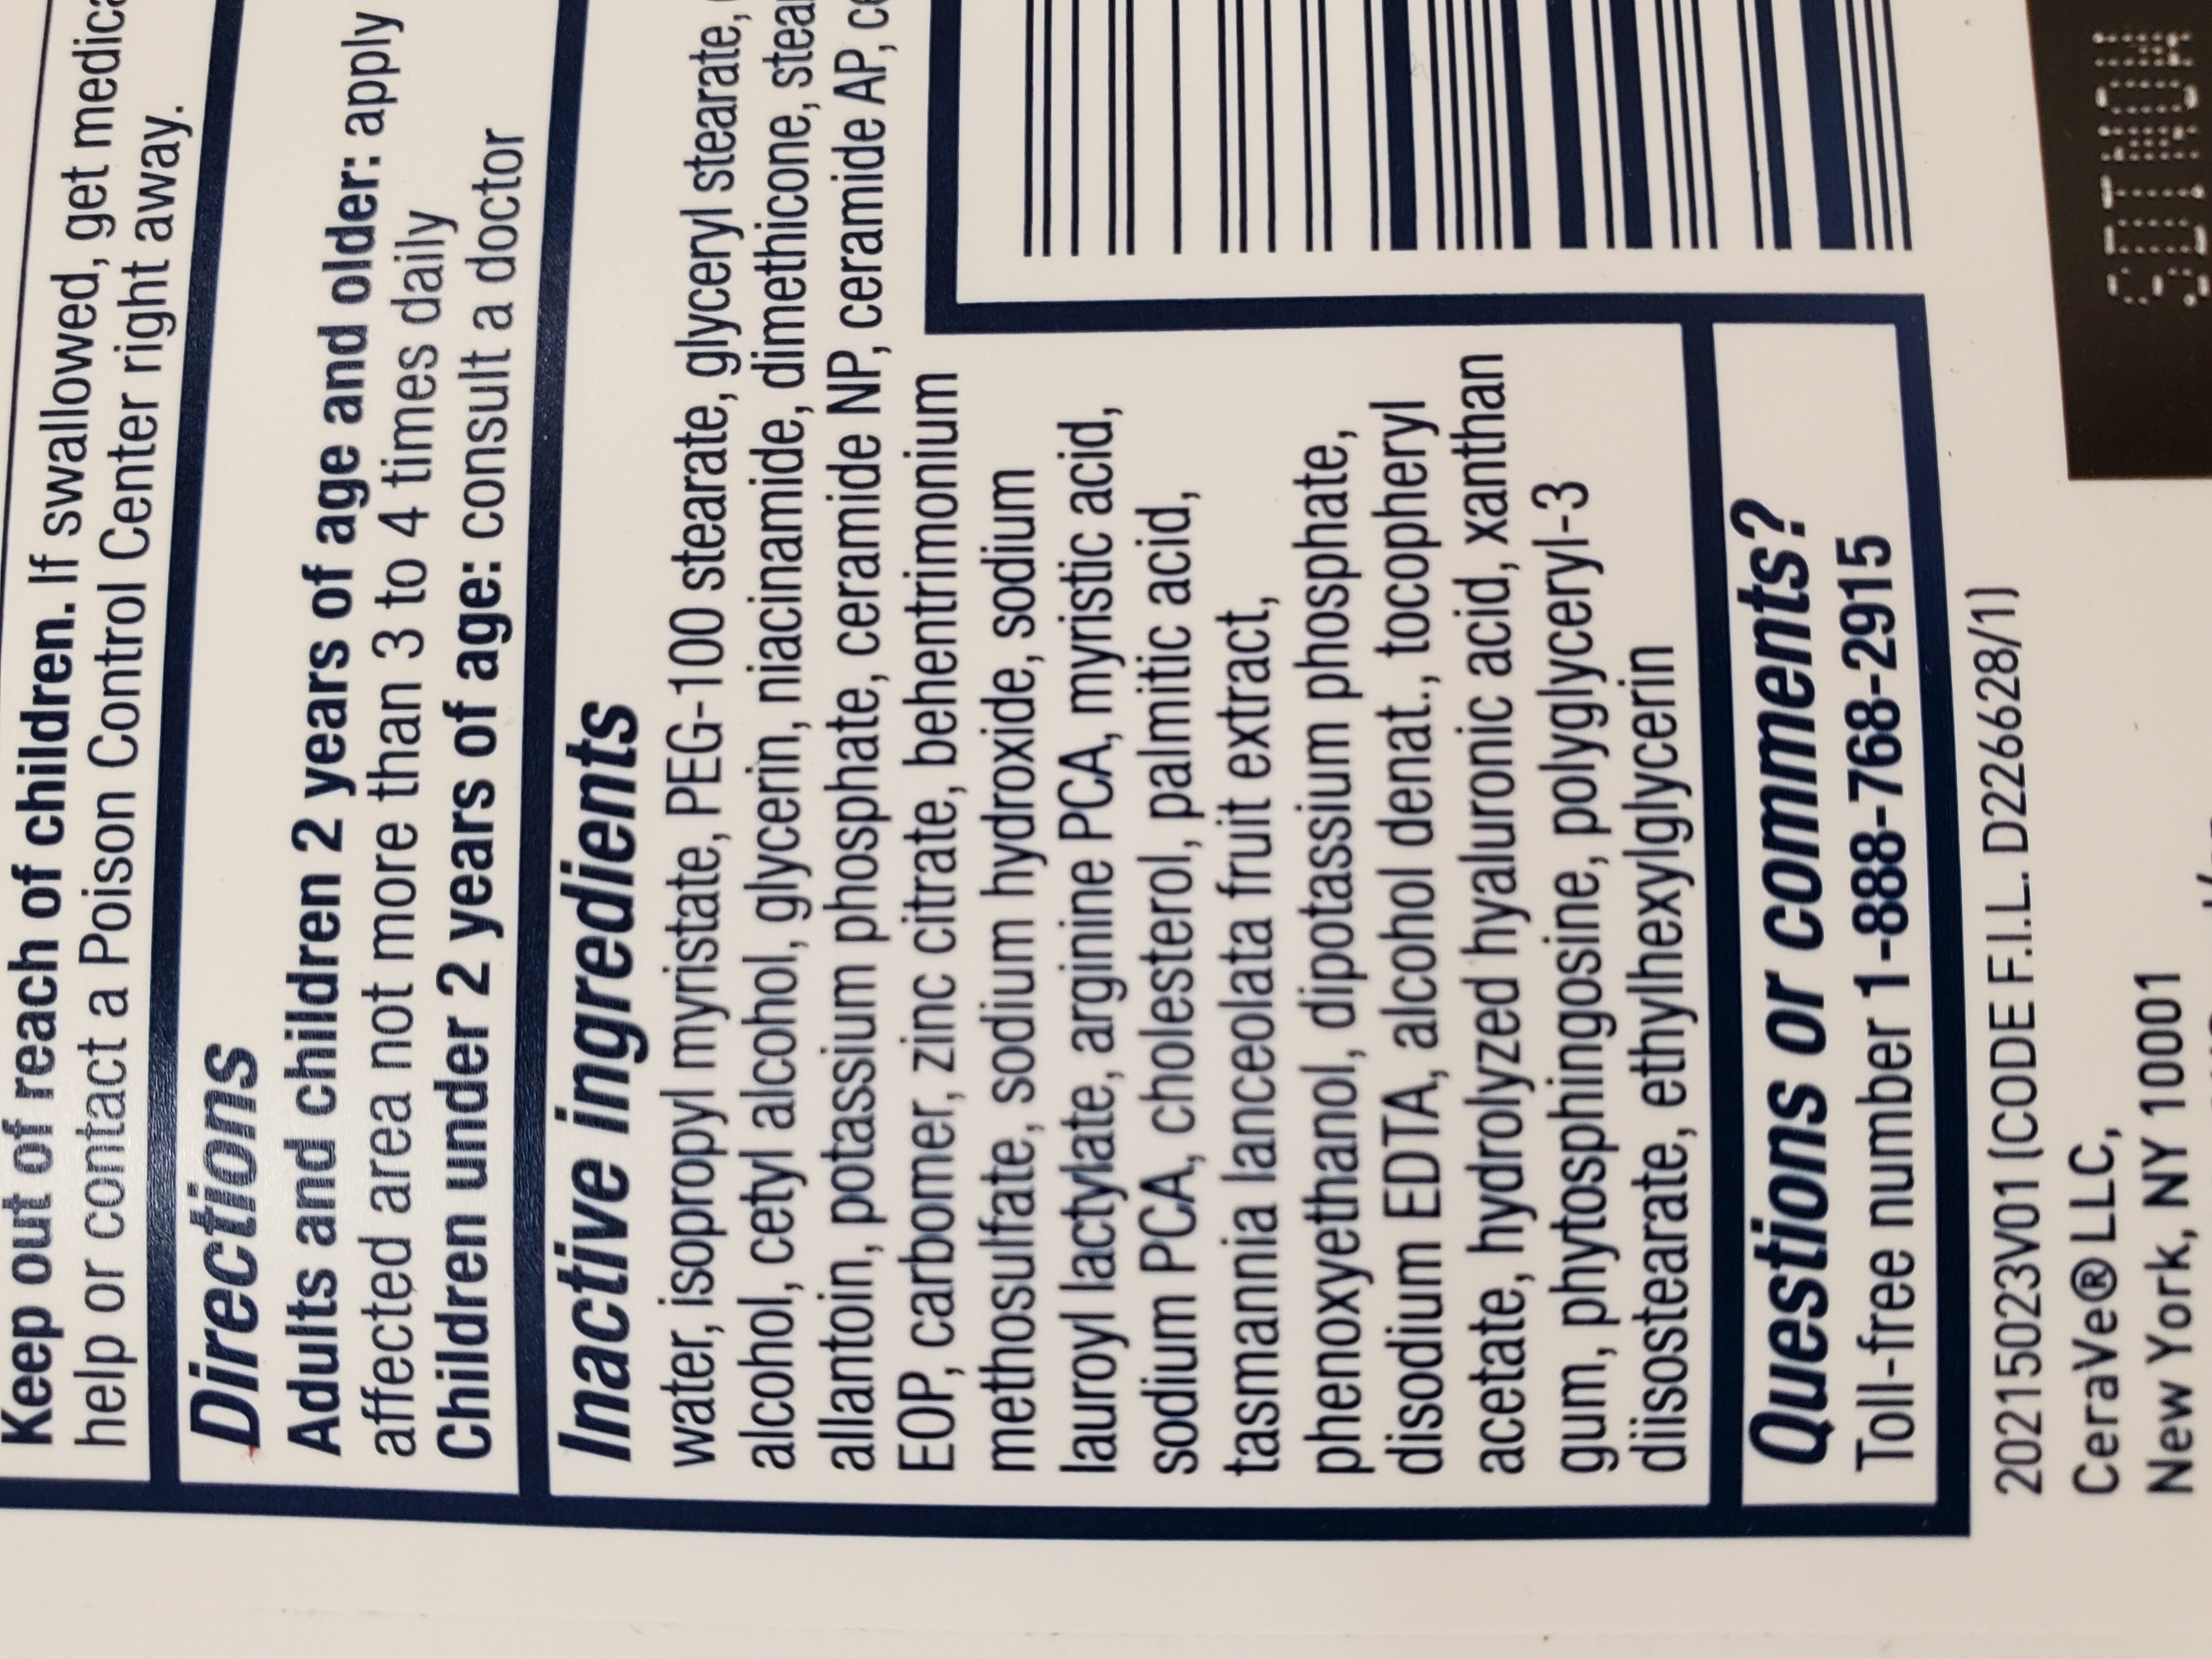 CeraVe Itch Relief Moisturizing Lotion - Ingredients - en